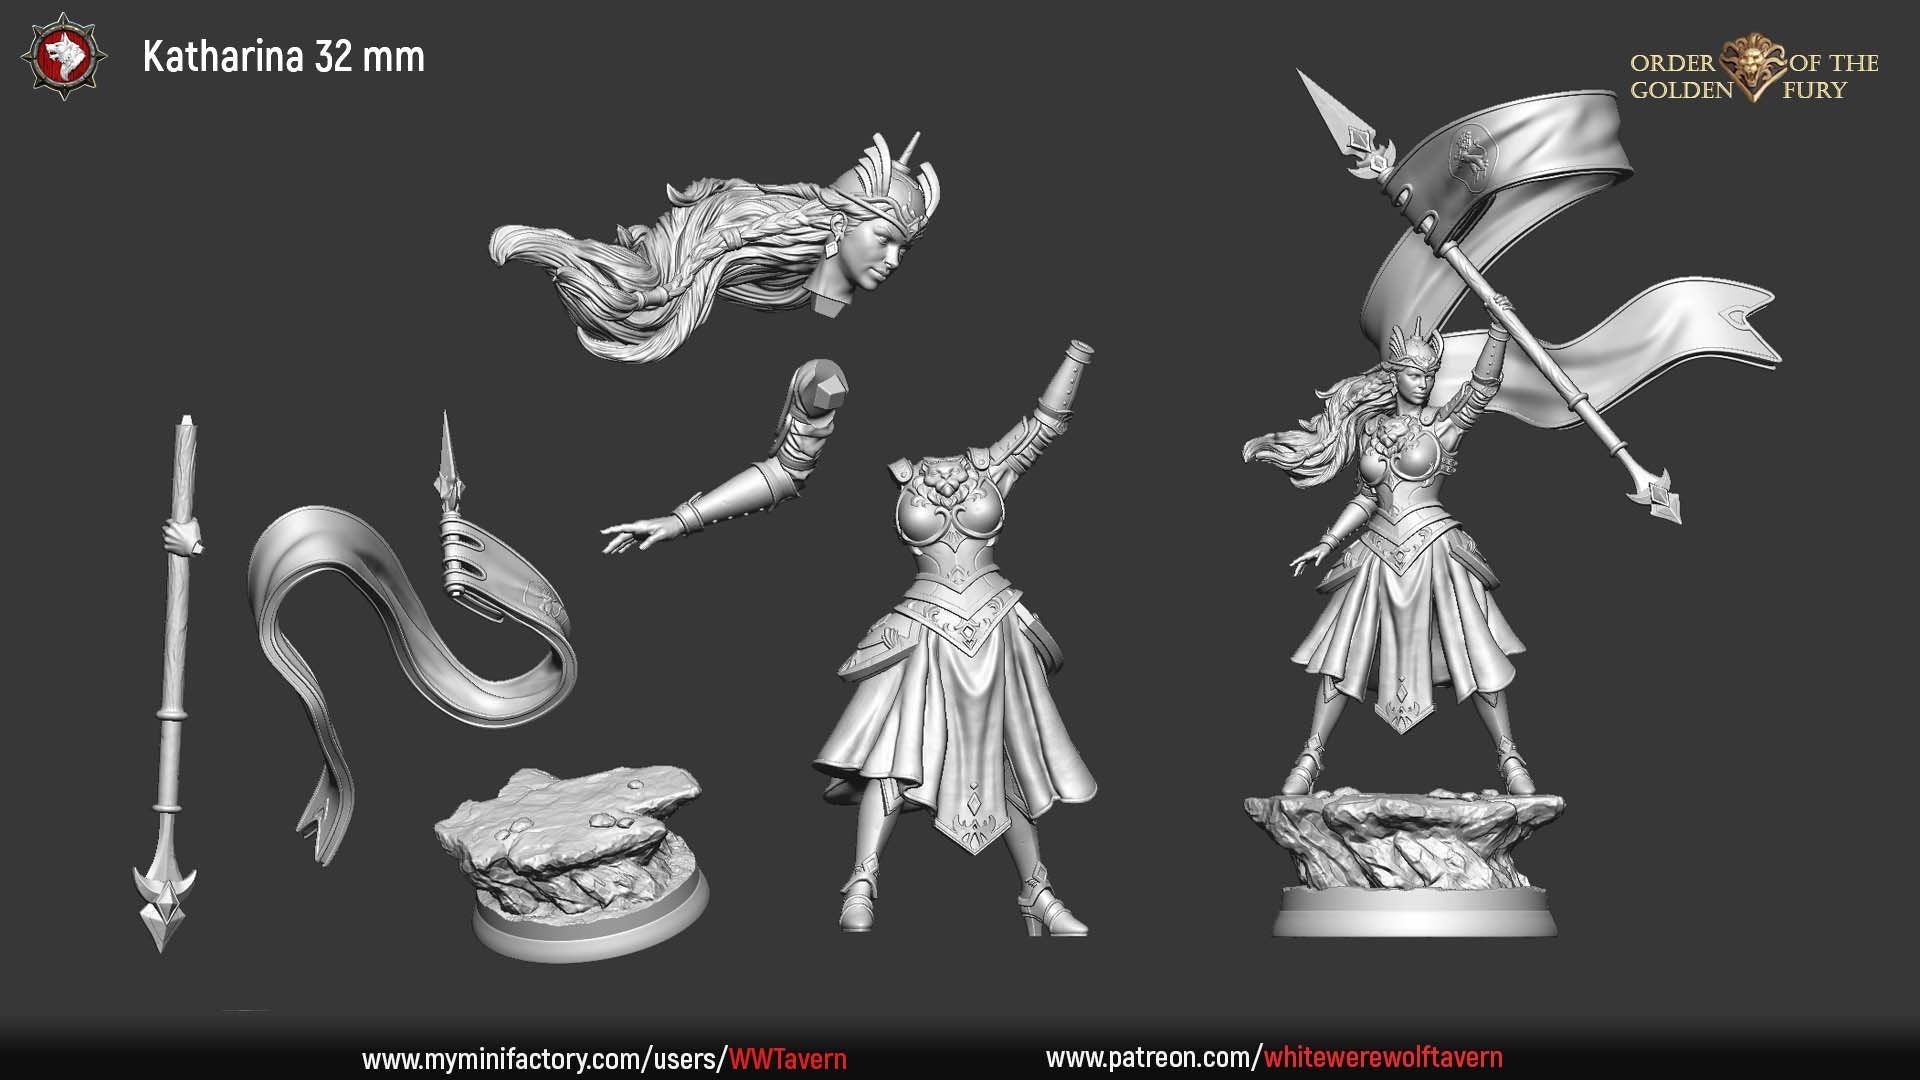 Katharina | Order Of The Golden Fury | Multiple Scales | Resin 3D Printed Miniature | White Werewolf Tavern | RPG | D&D | DnD